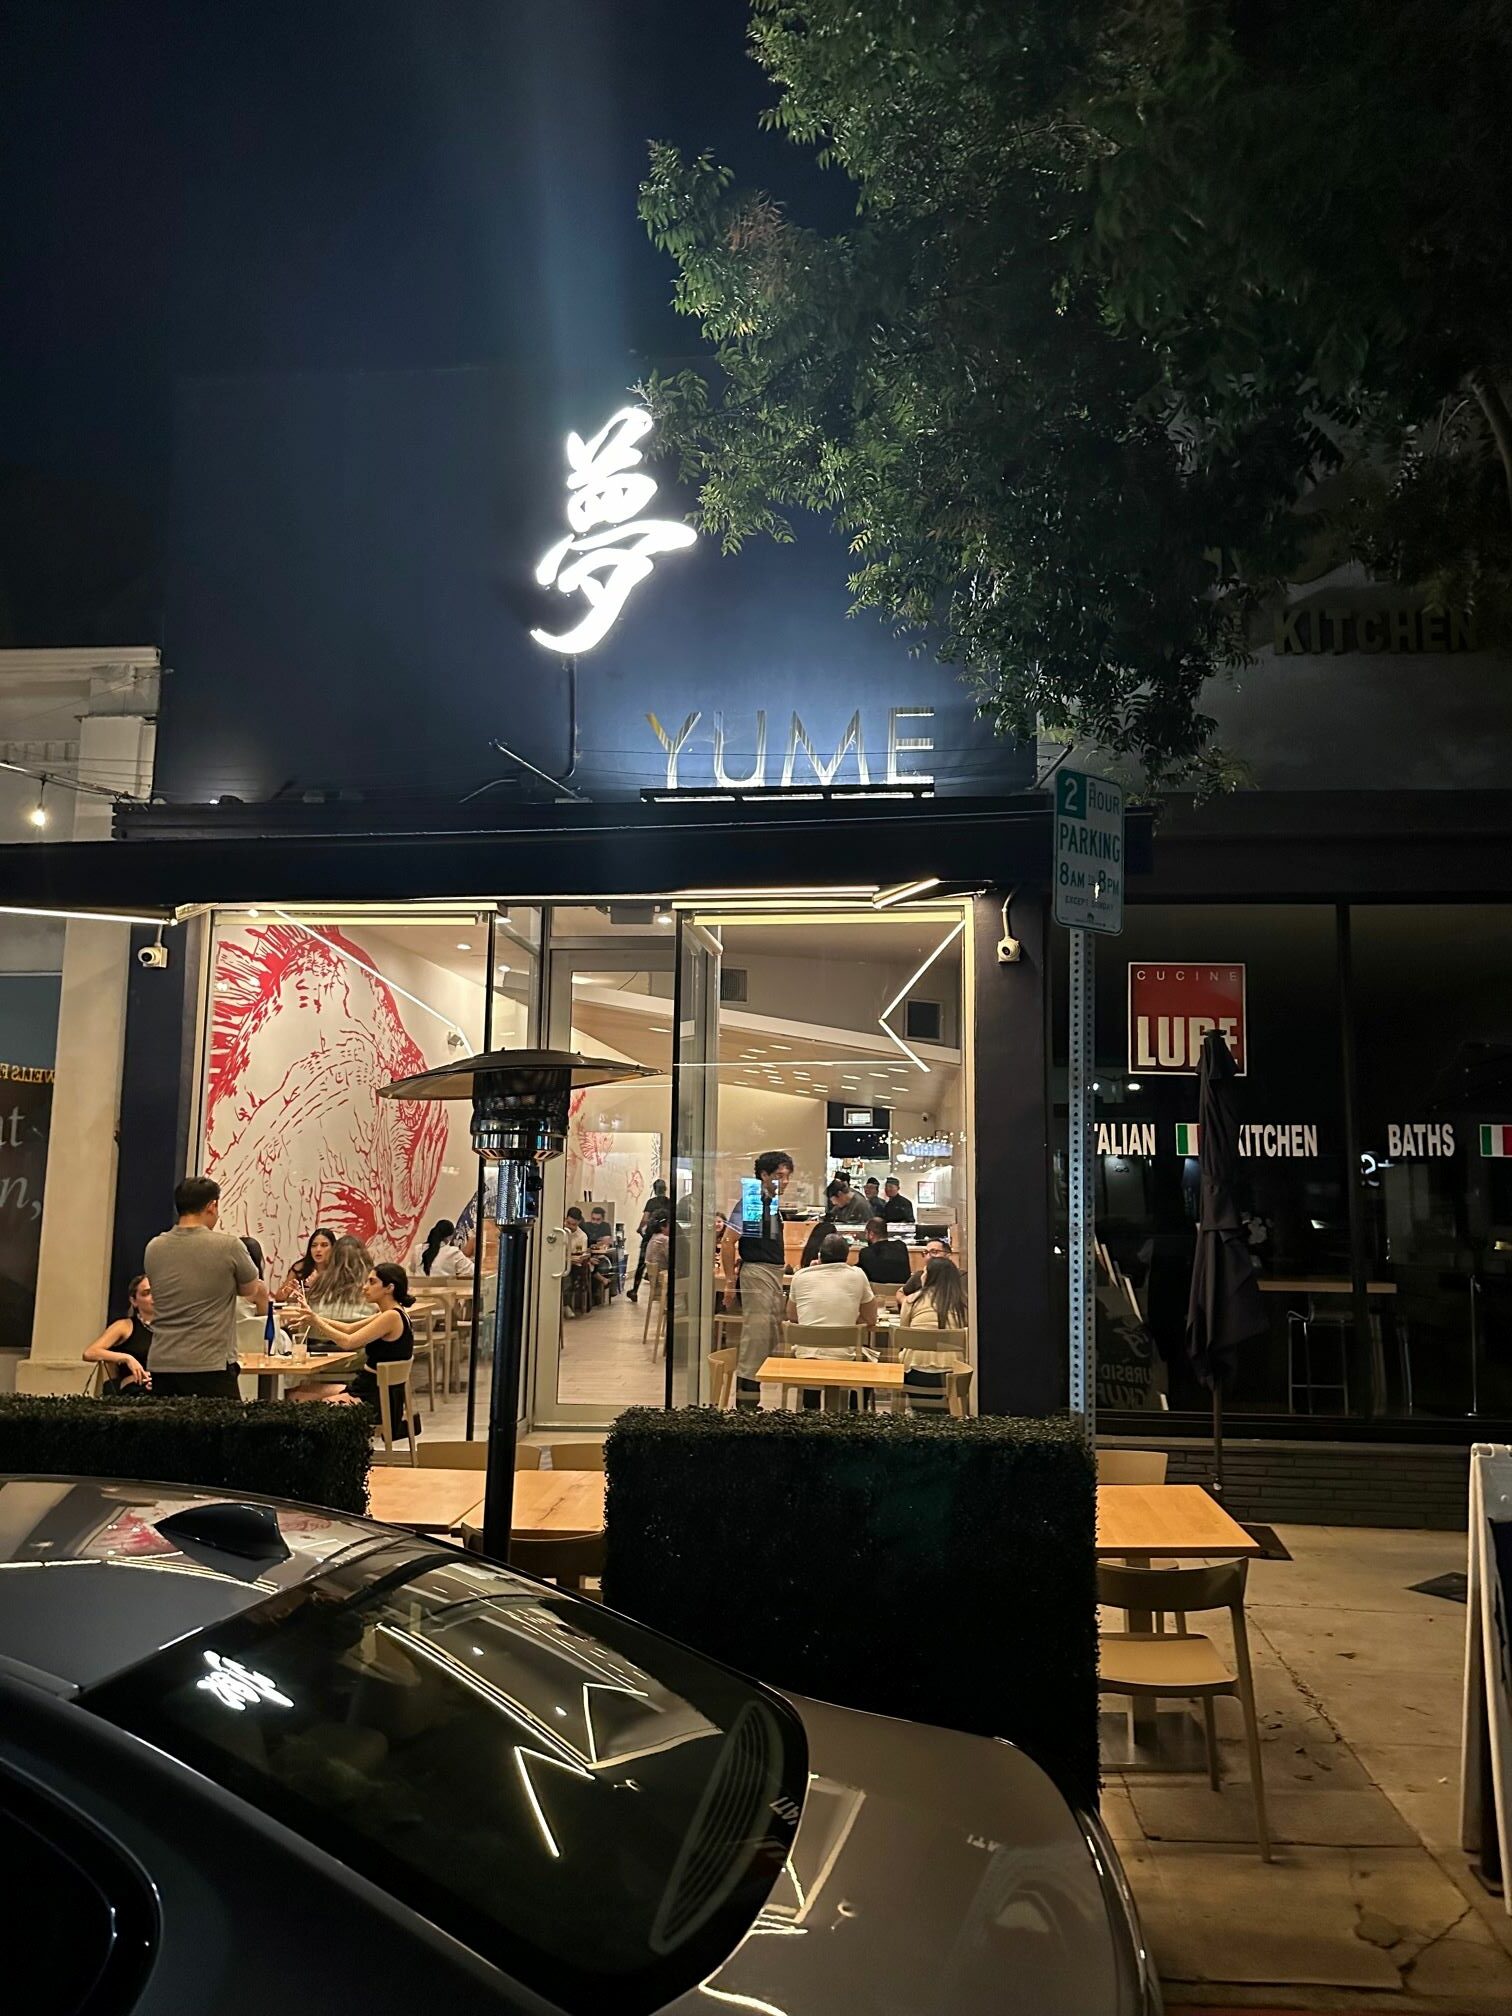 An image of the exterior of Yume Sushi.